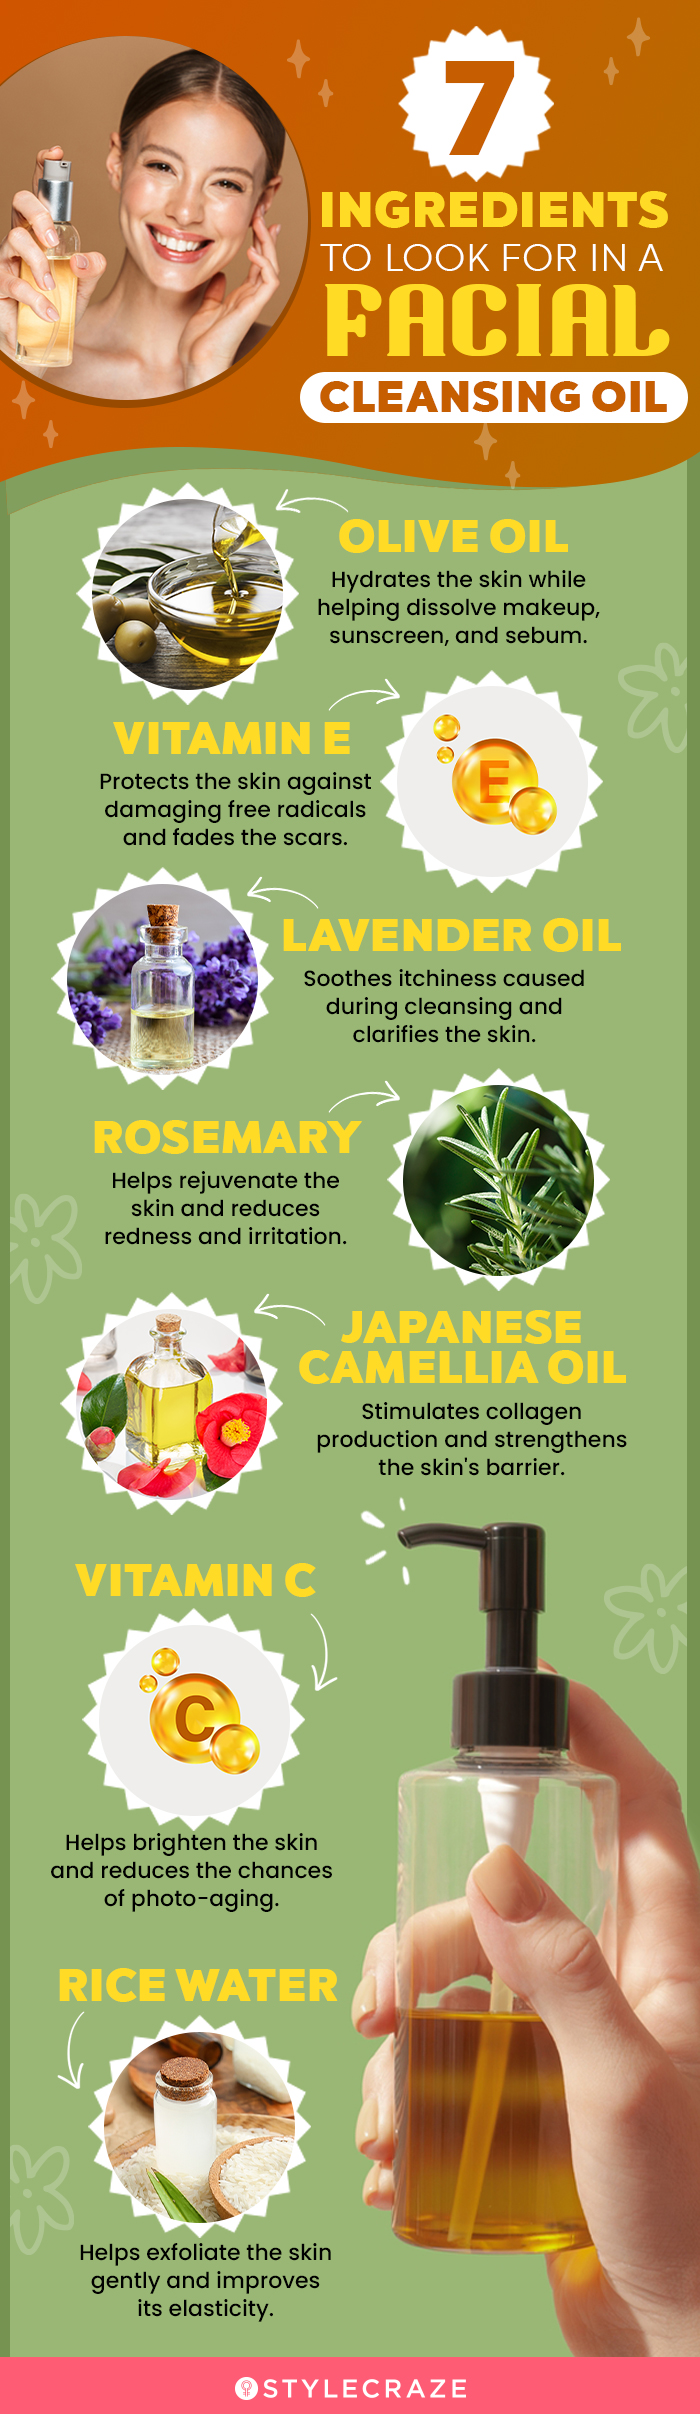 7 Ingredients To Look For In A Facial Cleansing Oil (infographic)